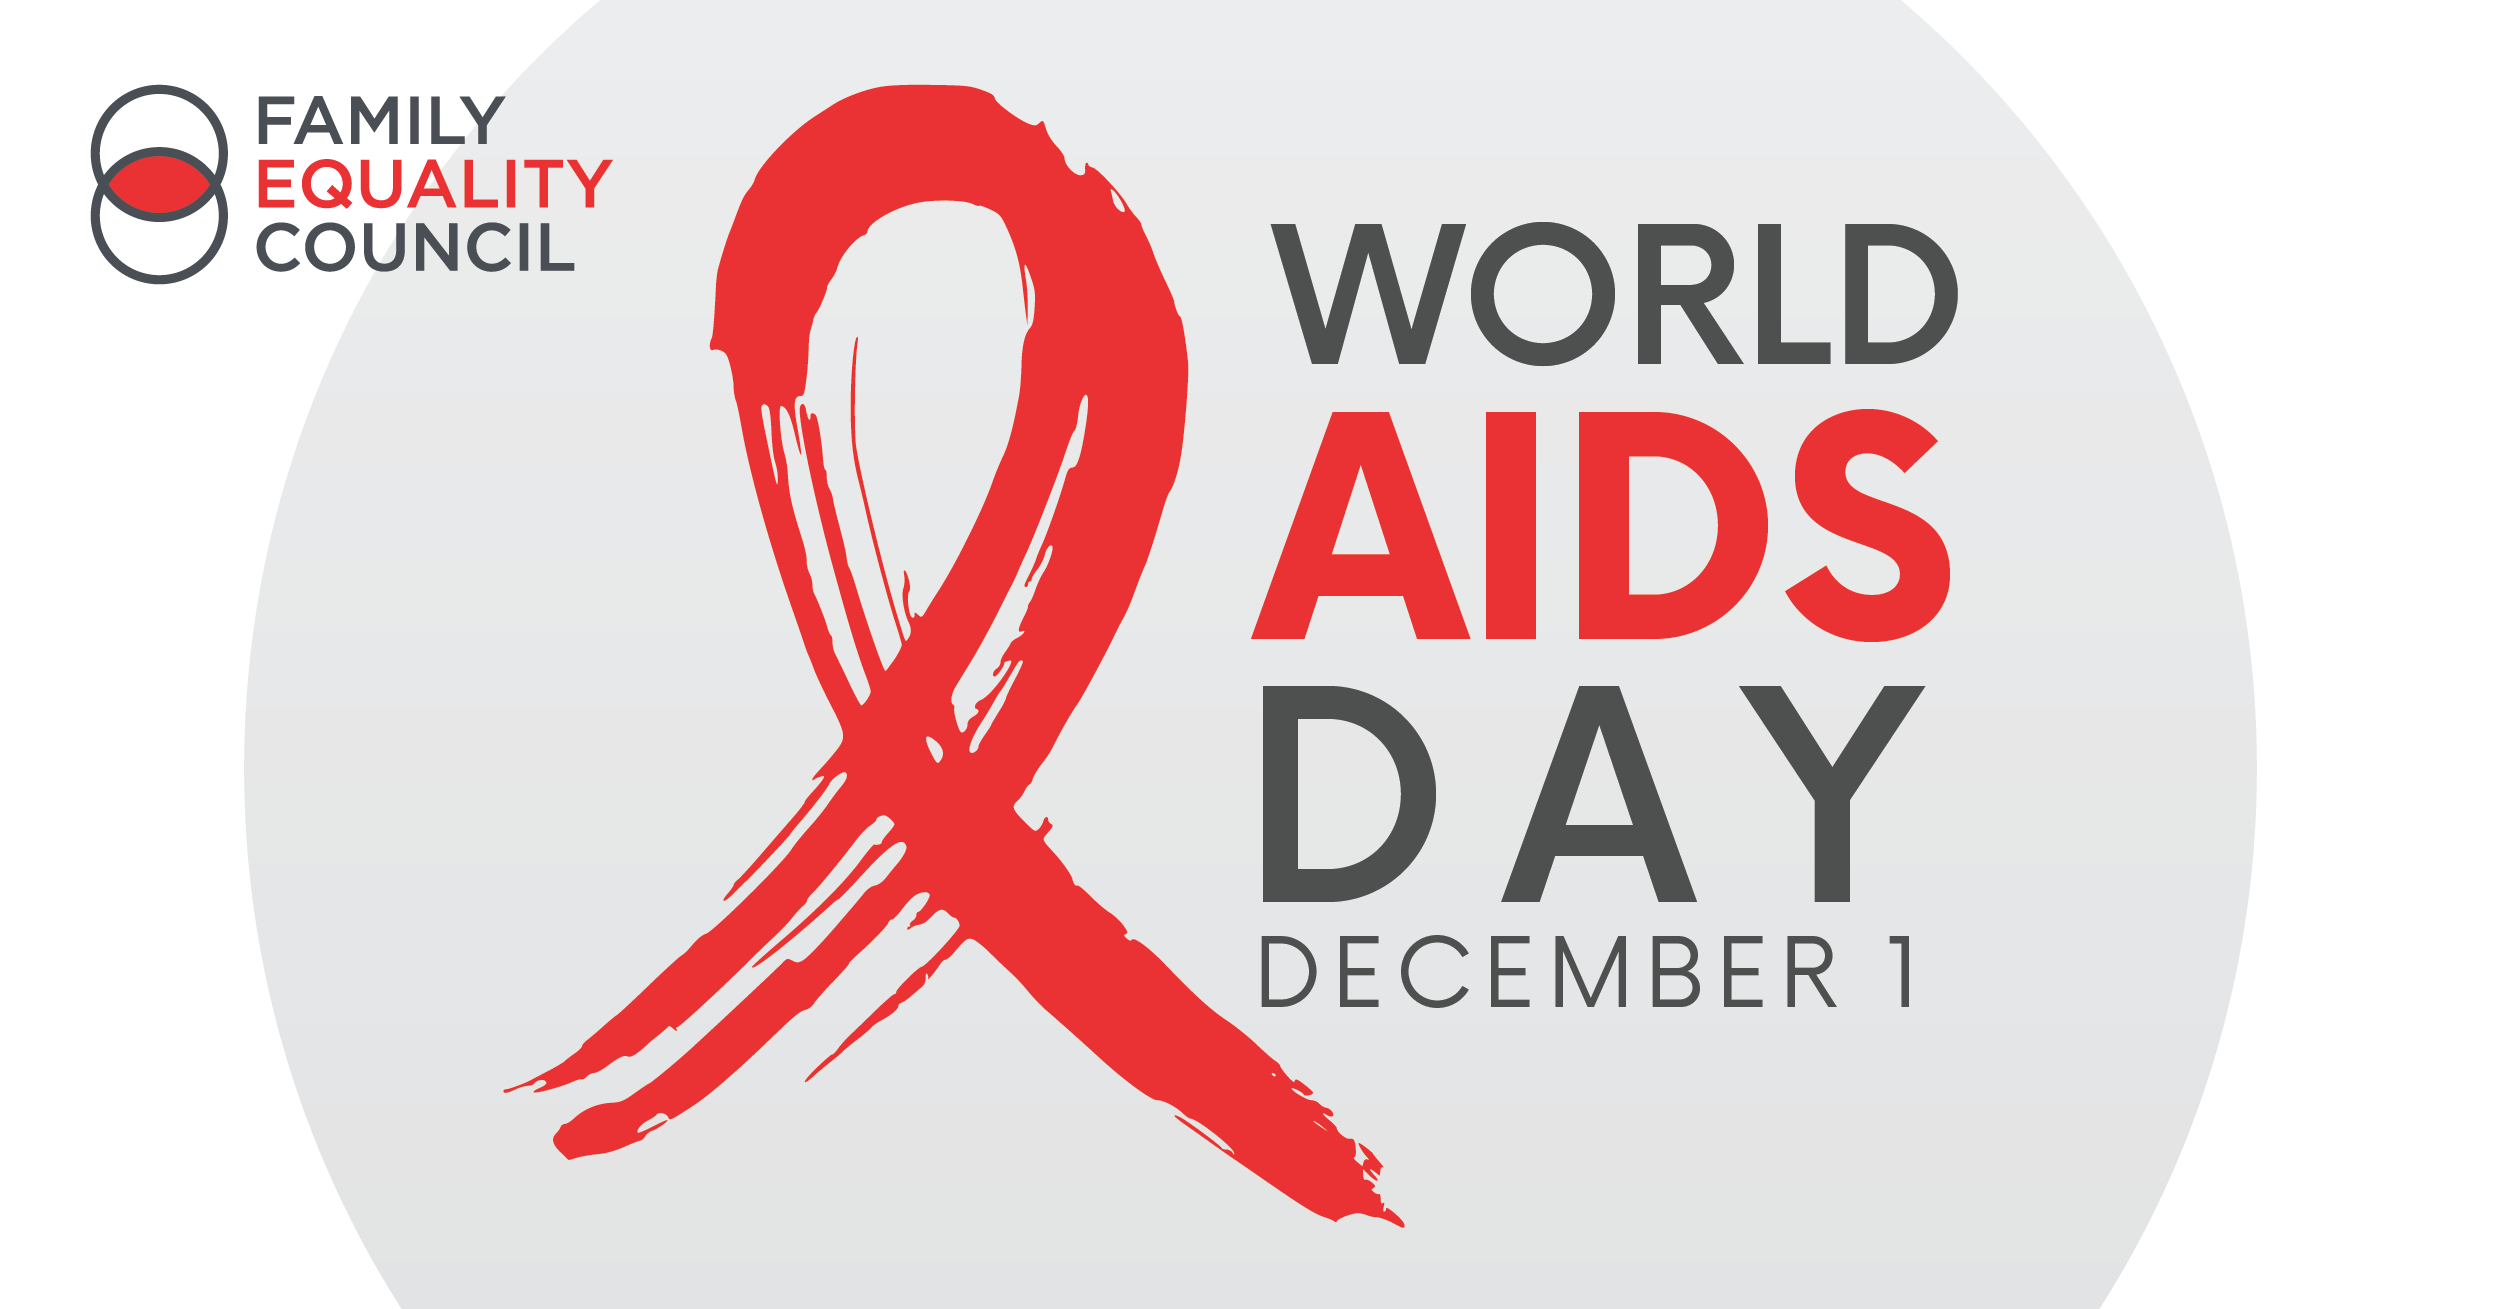 world aids day december 1 family equality council